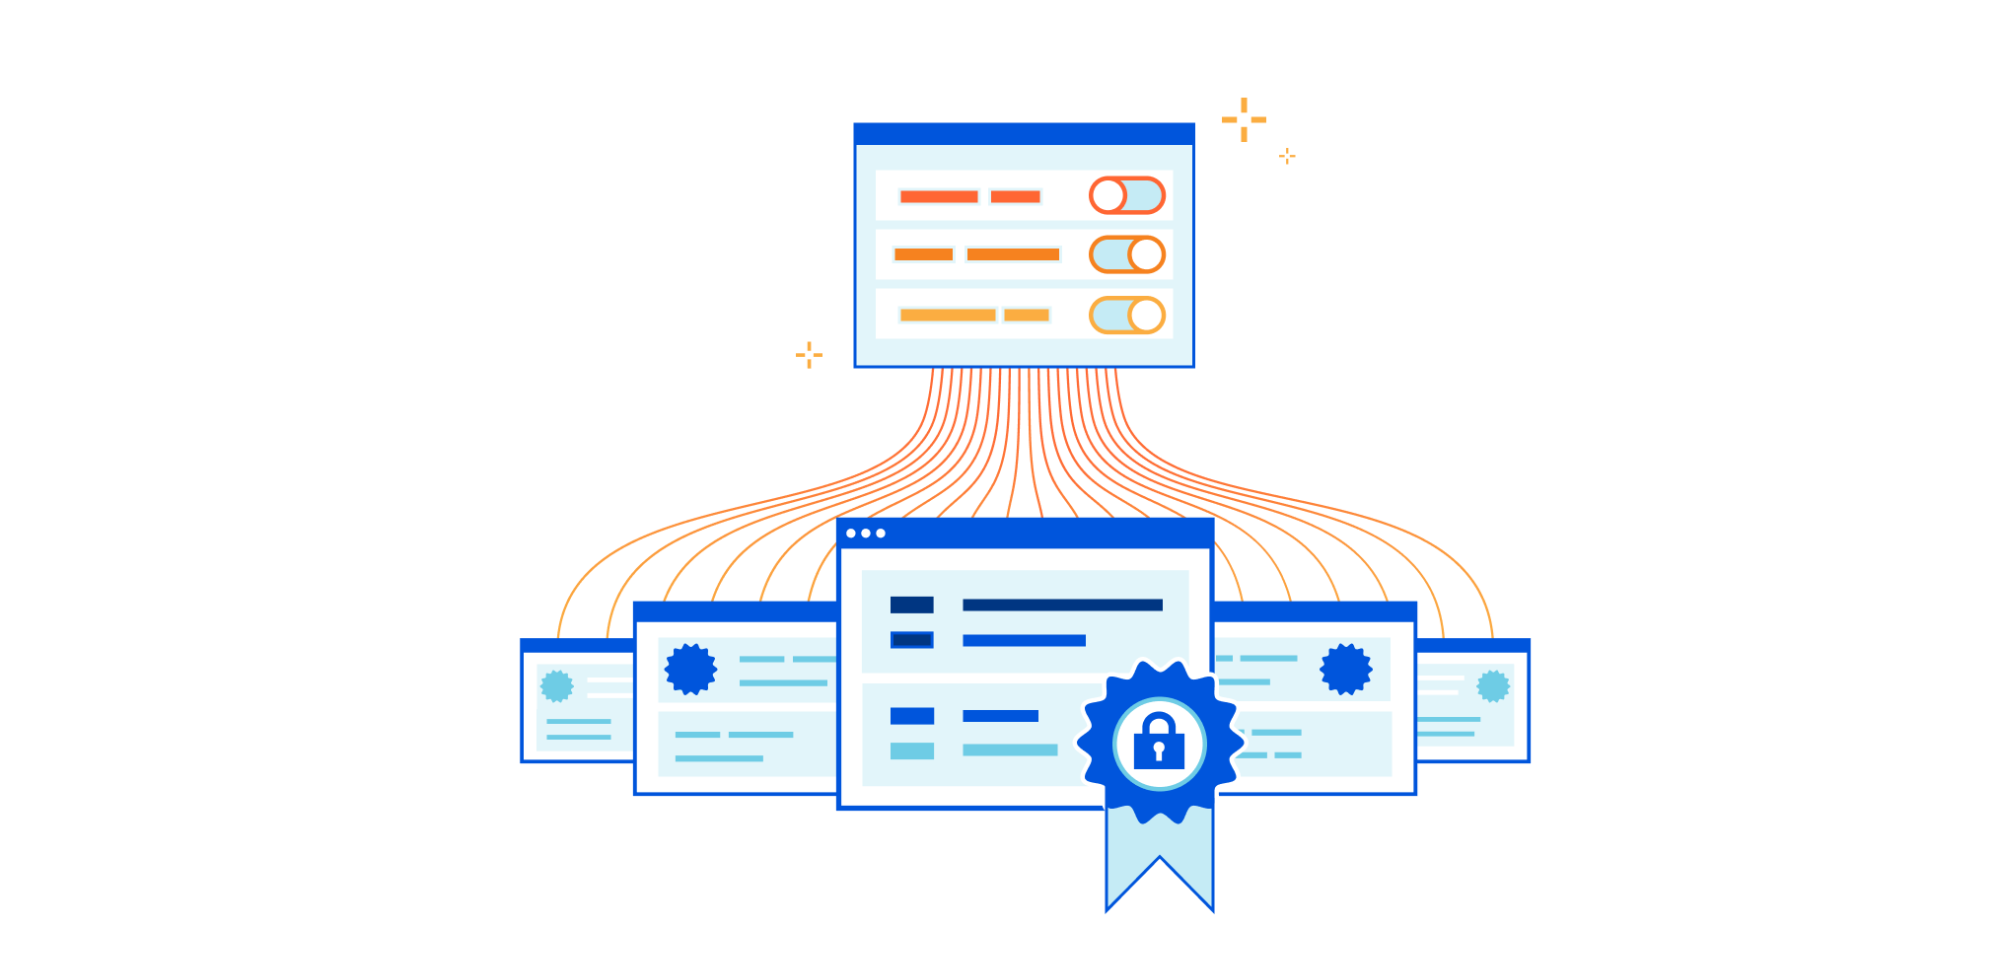 Introducing: Advanced Certificate Manager